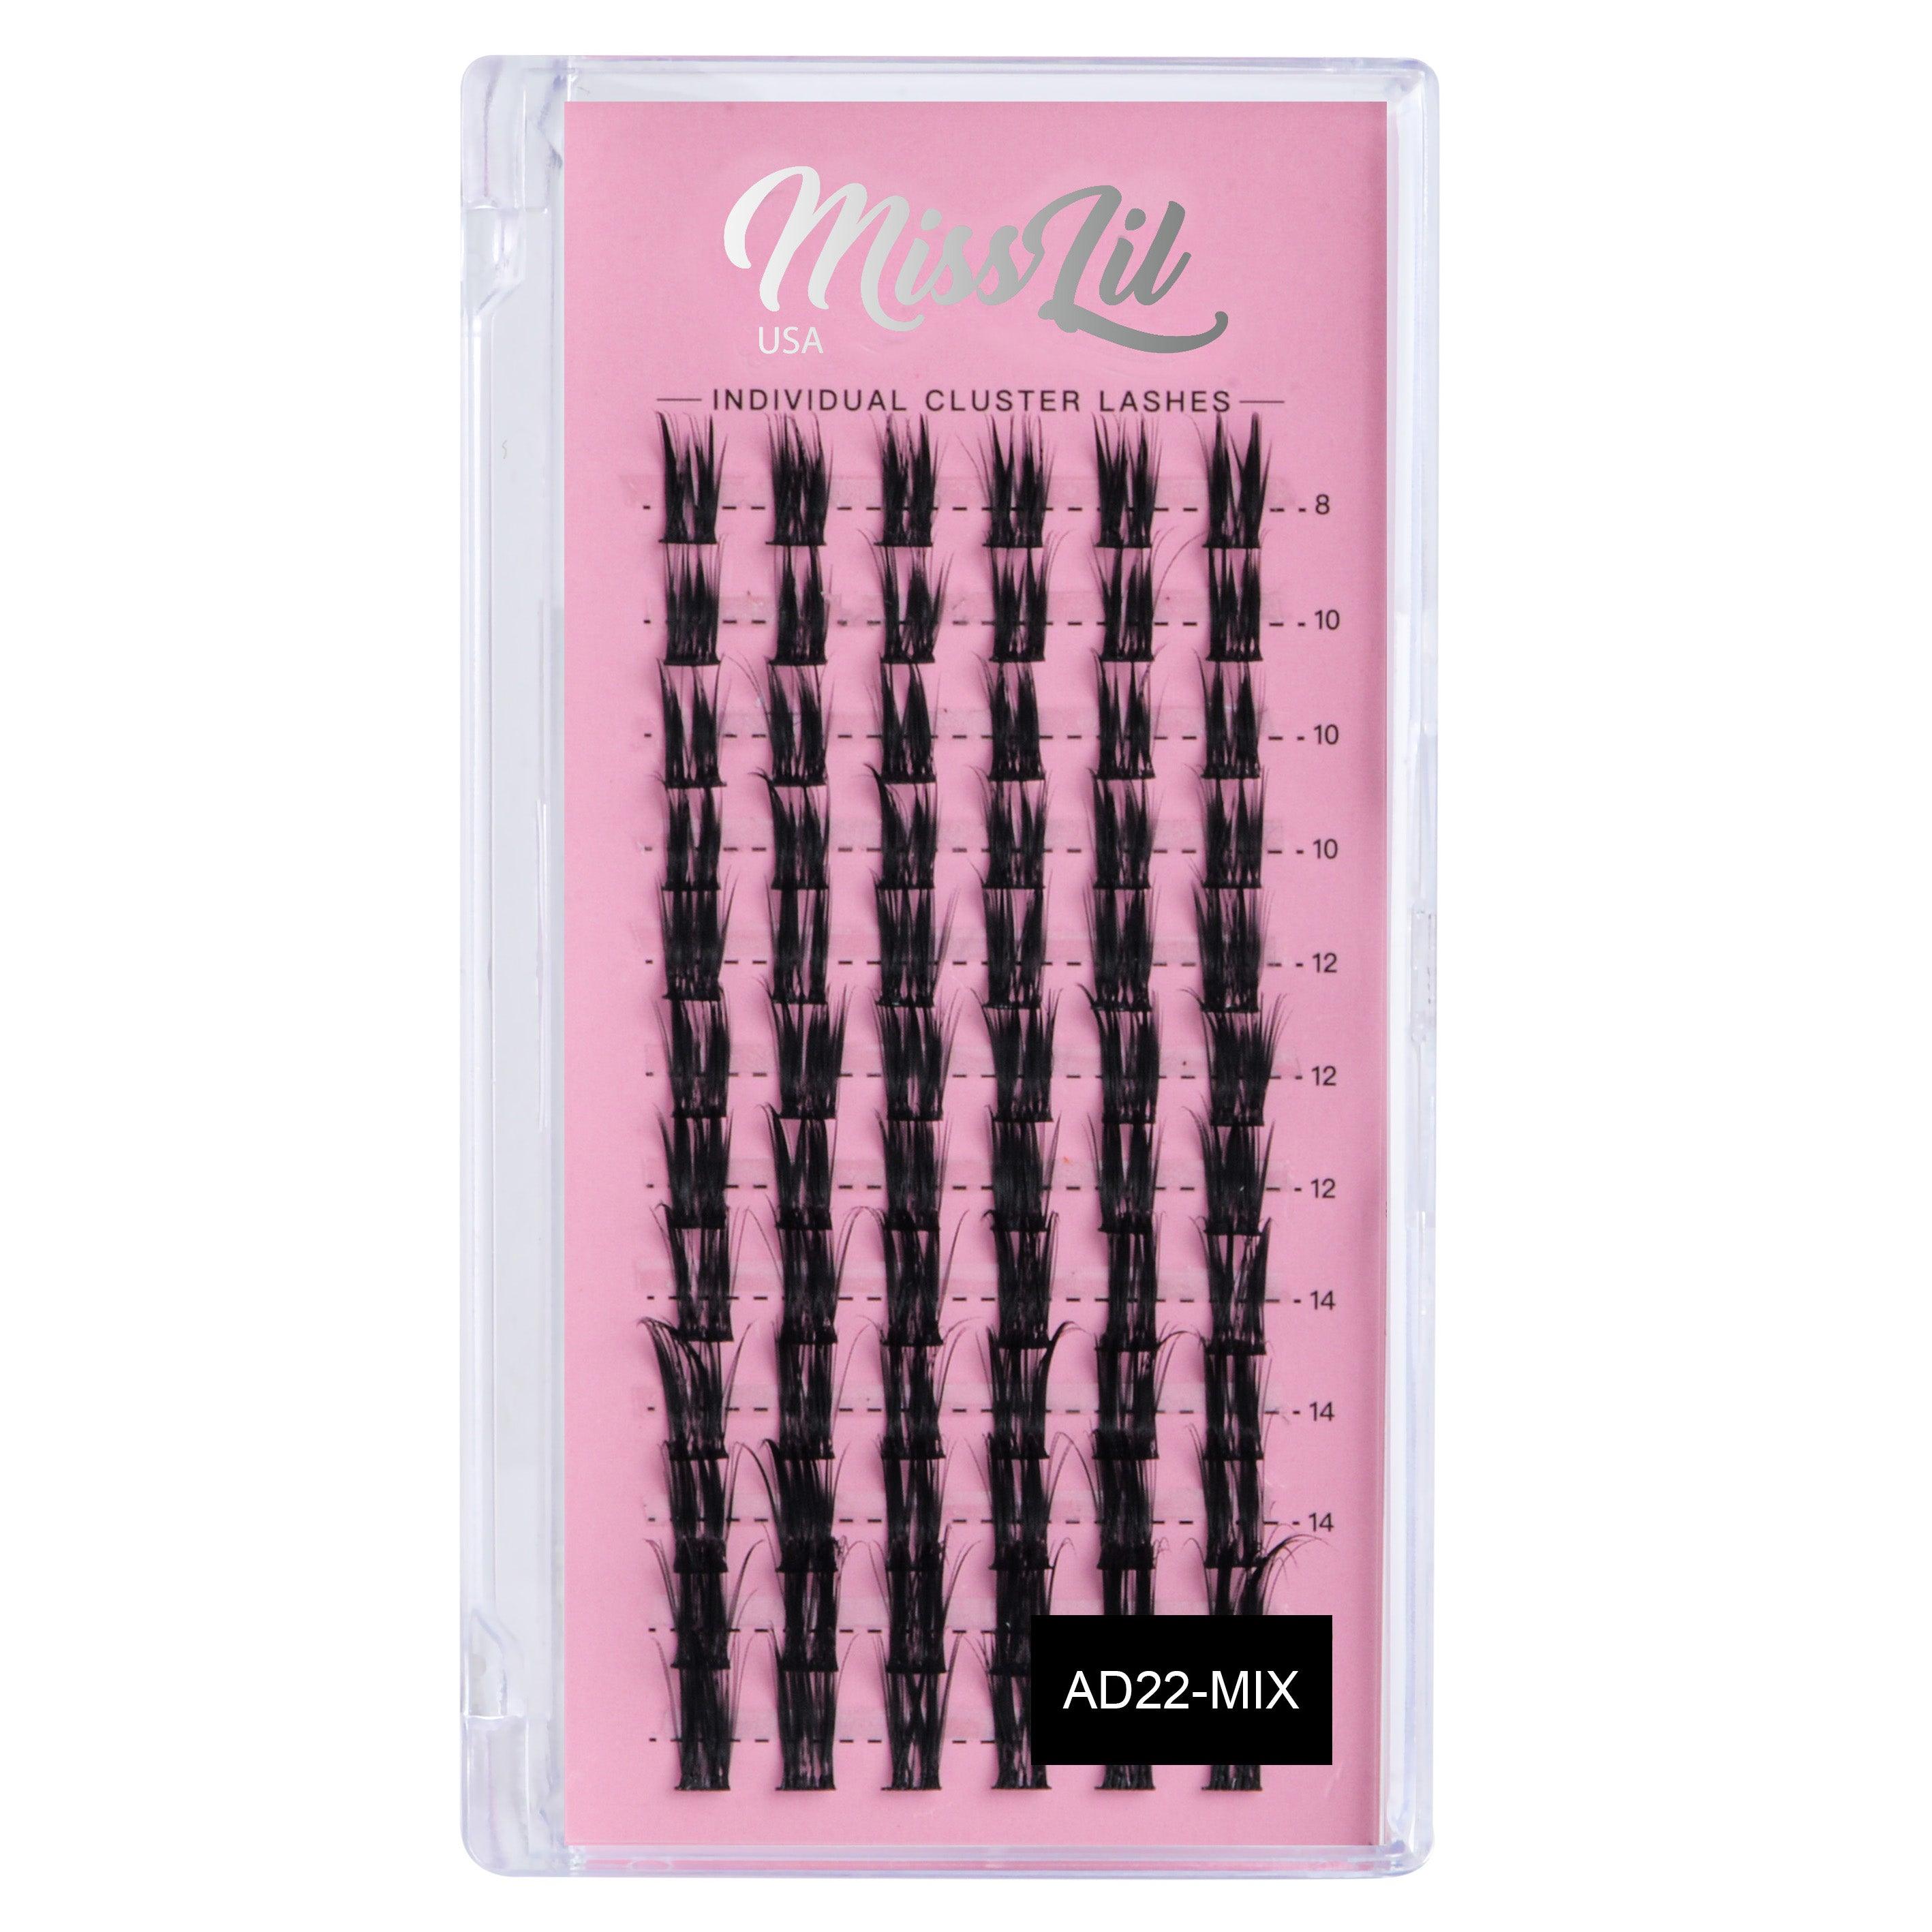 DIY Individual Cluster lashes AD-22 Small MIX Tray - Miss Lil USA